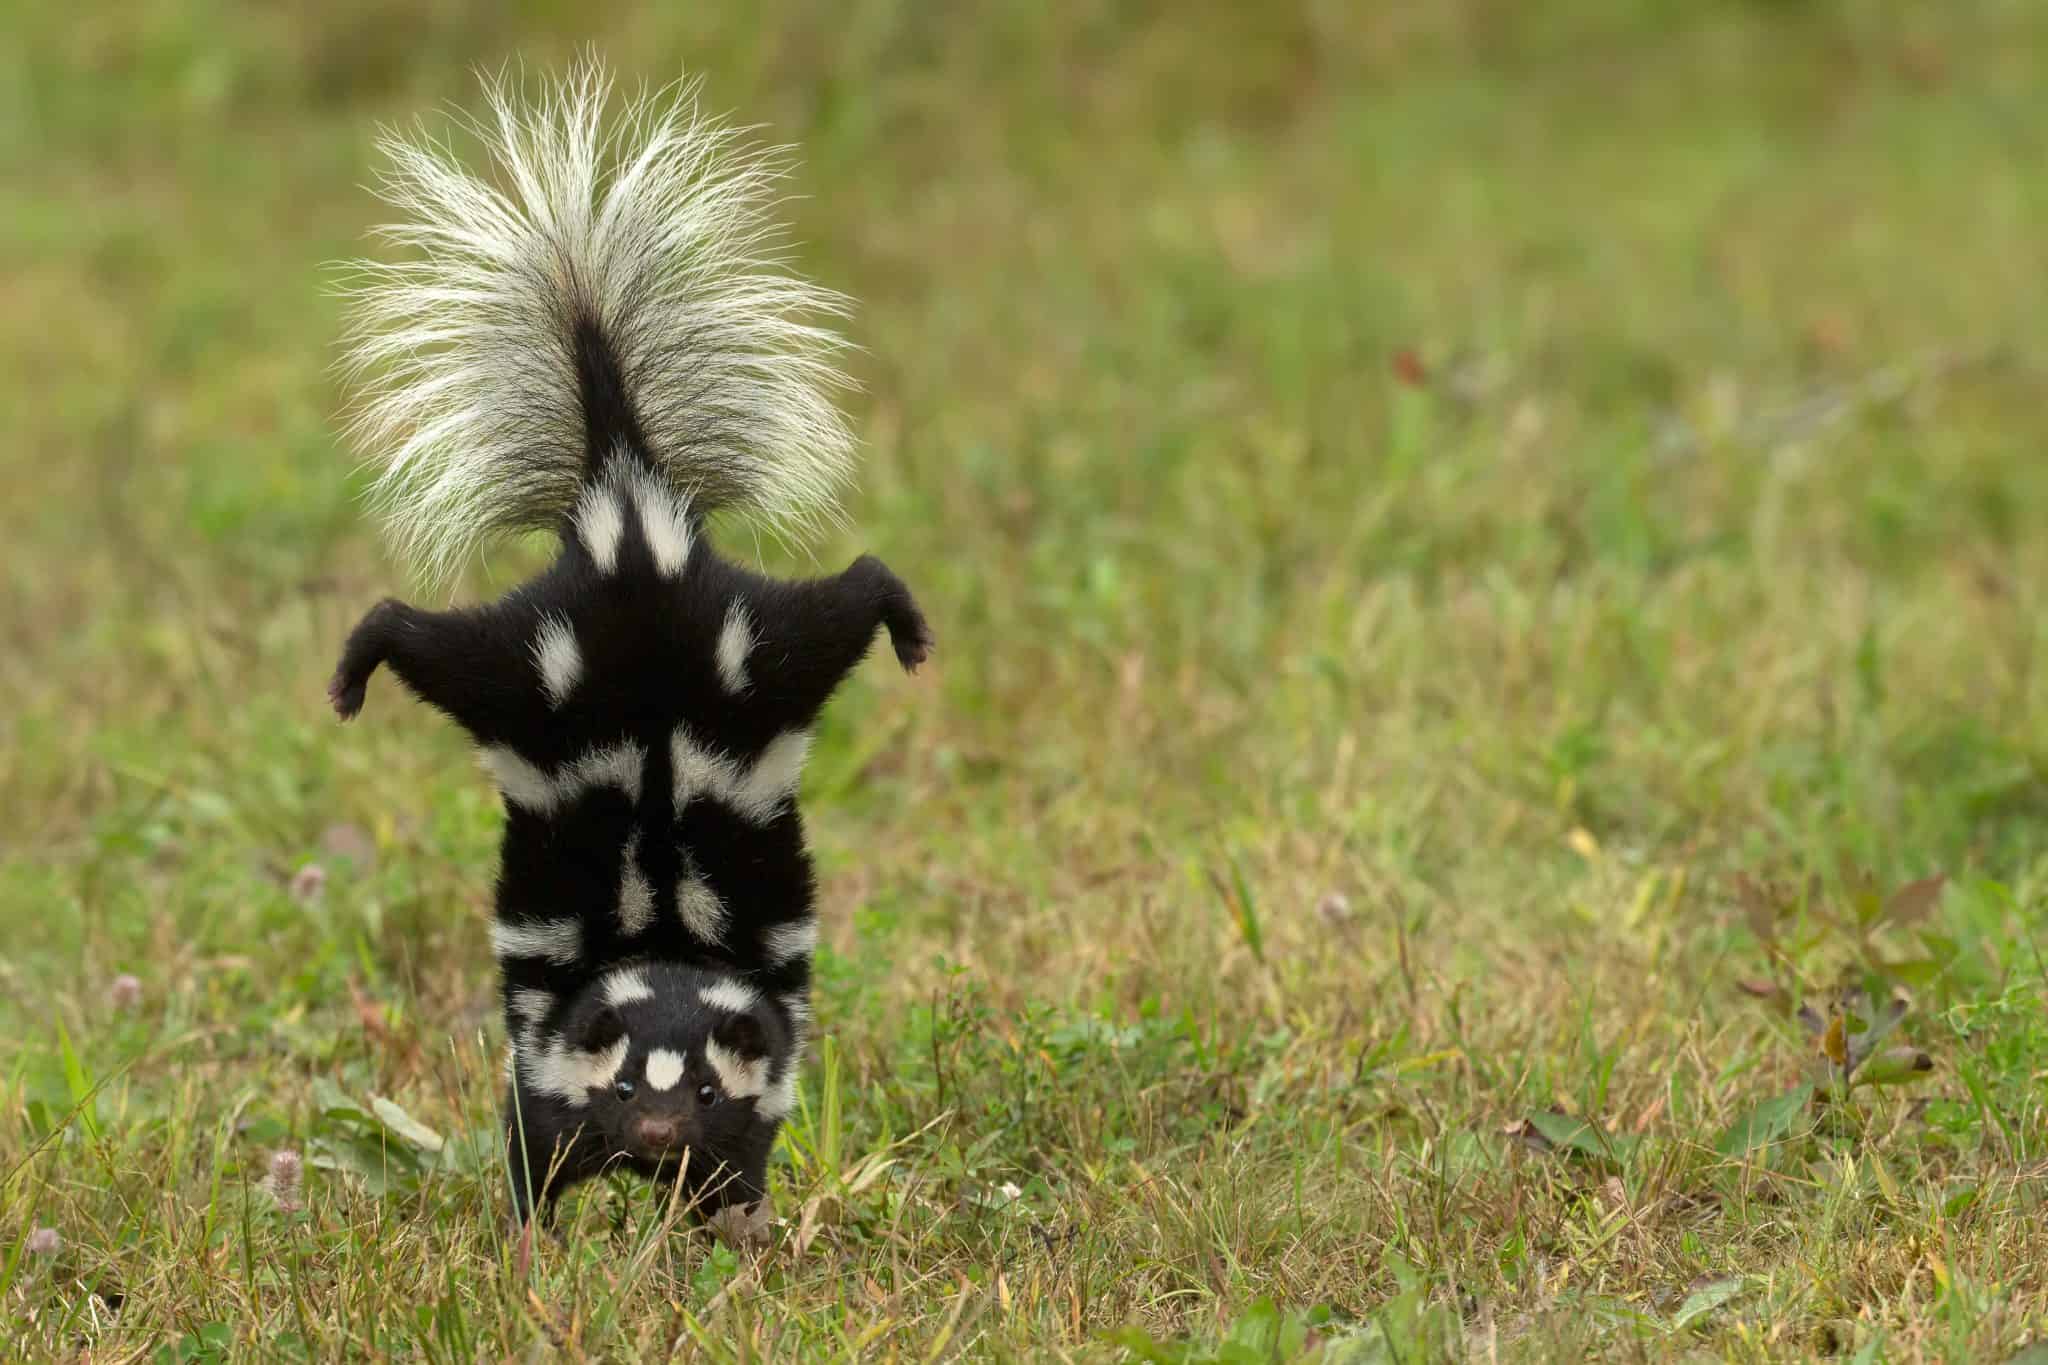 Should the Spotted Skunk be Listed as Endangered?